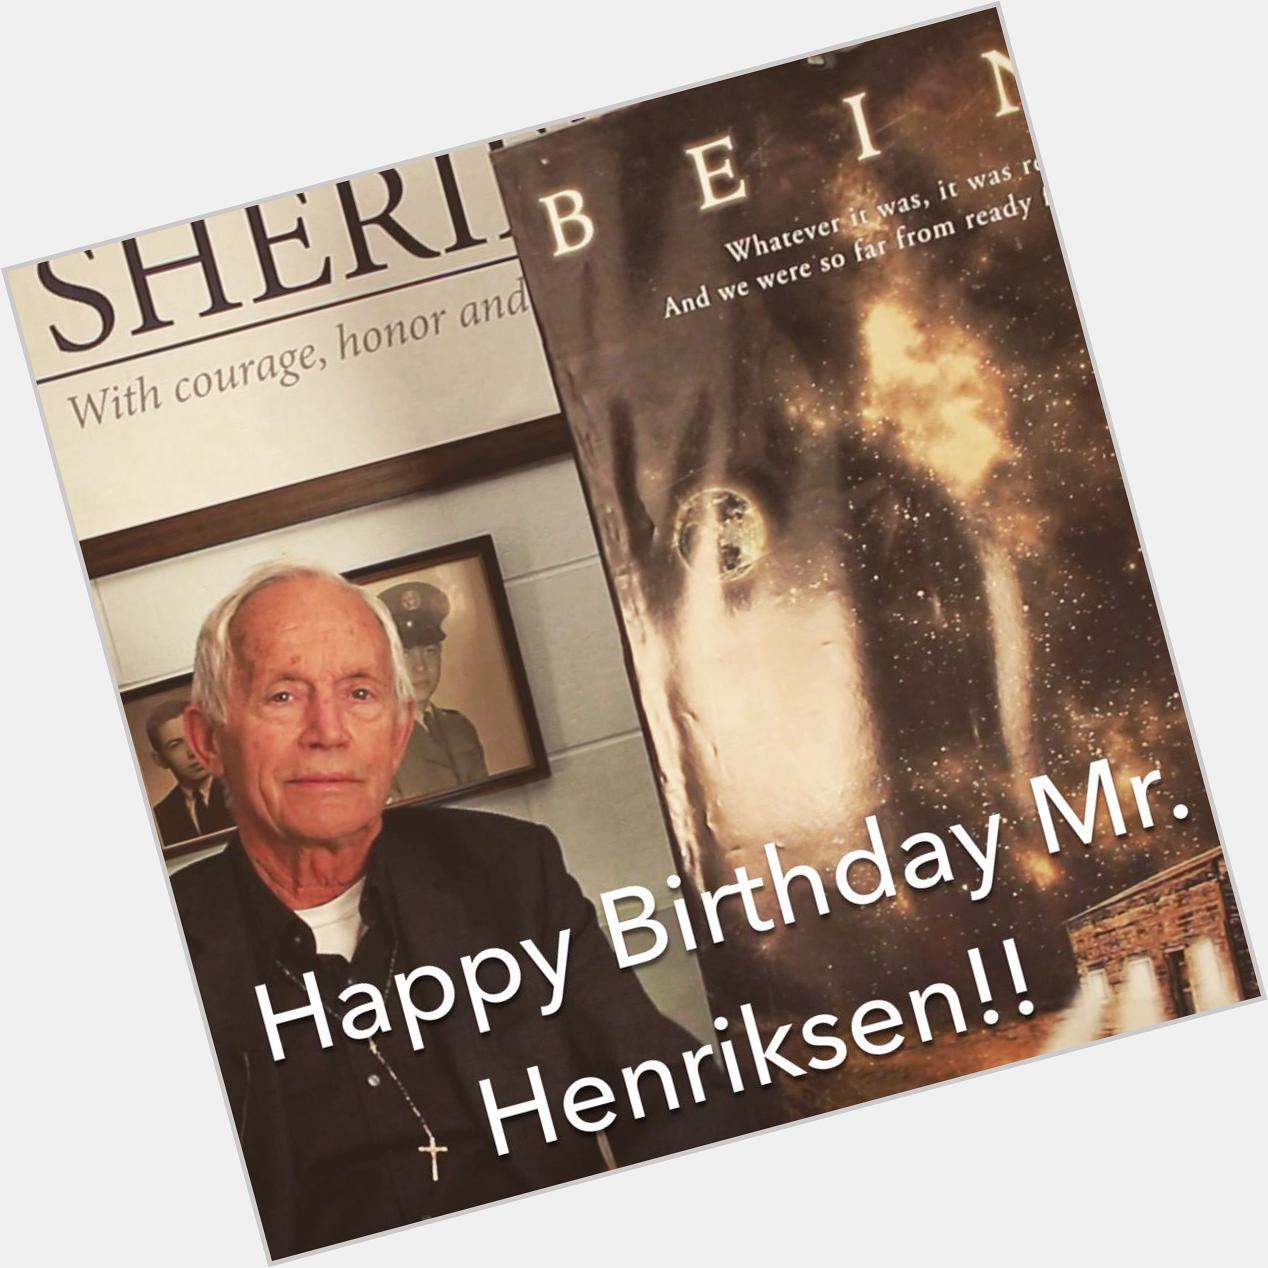 Happy Birthday to the incredible Lance Henriksen from the entire team!!  